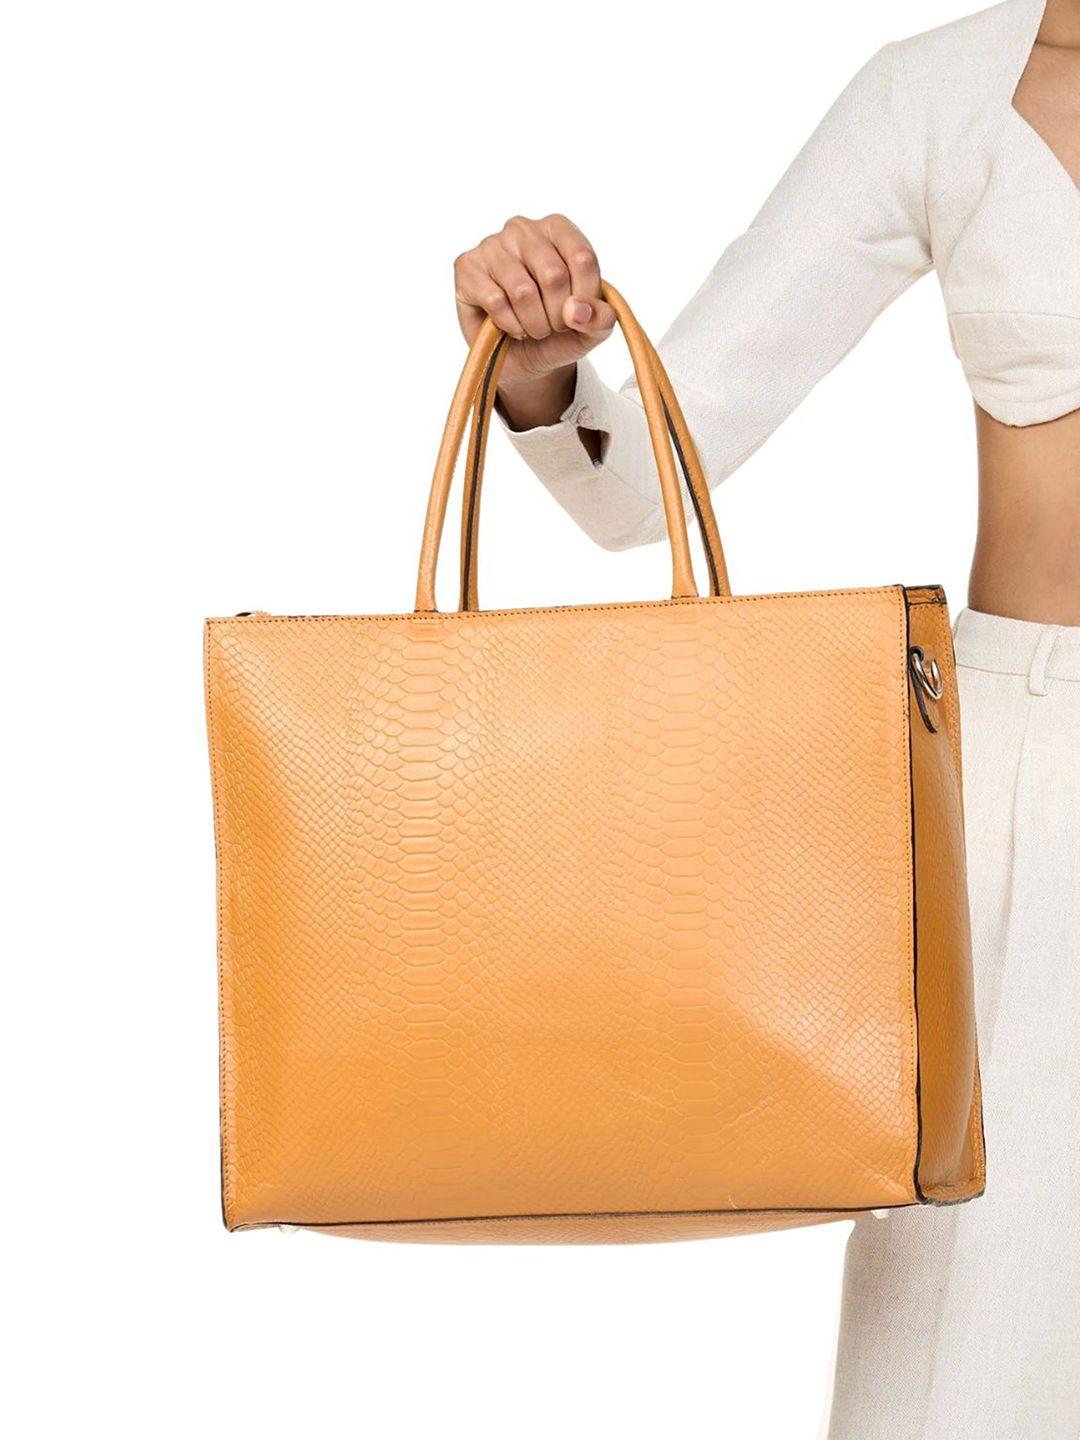 mistry textured leather oversized structured handheld bag